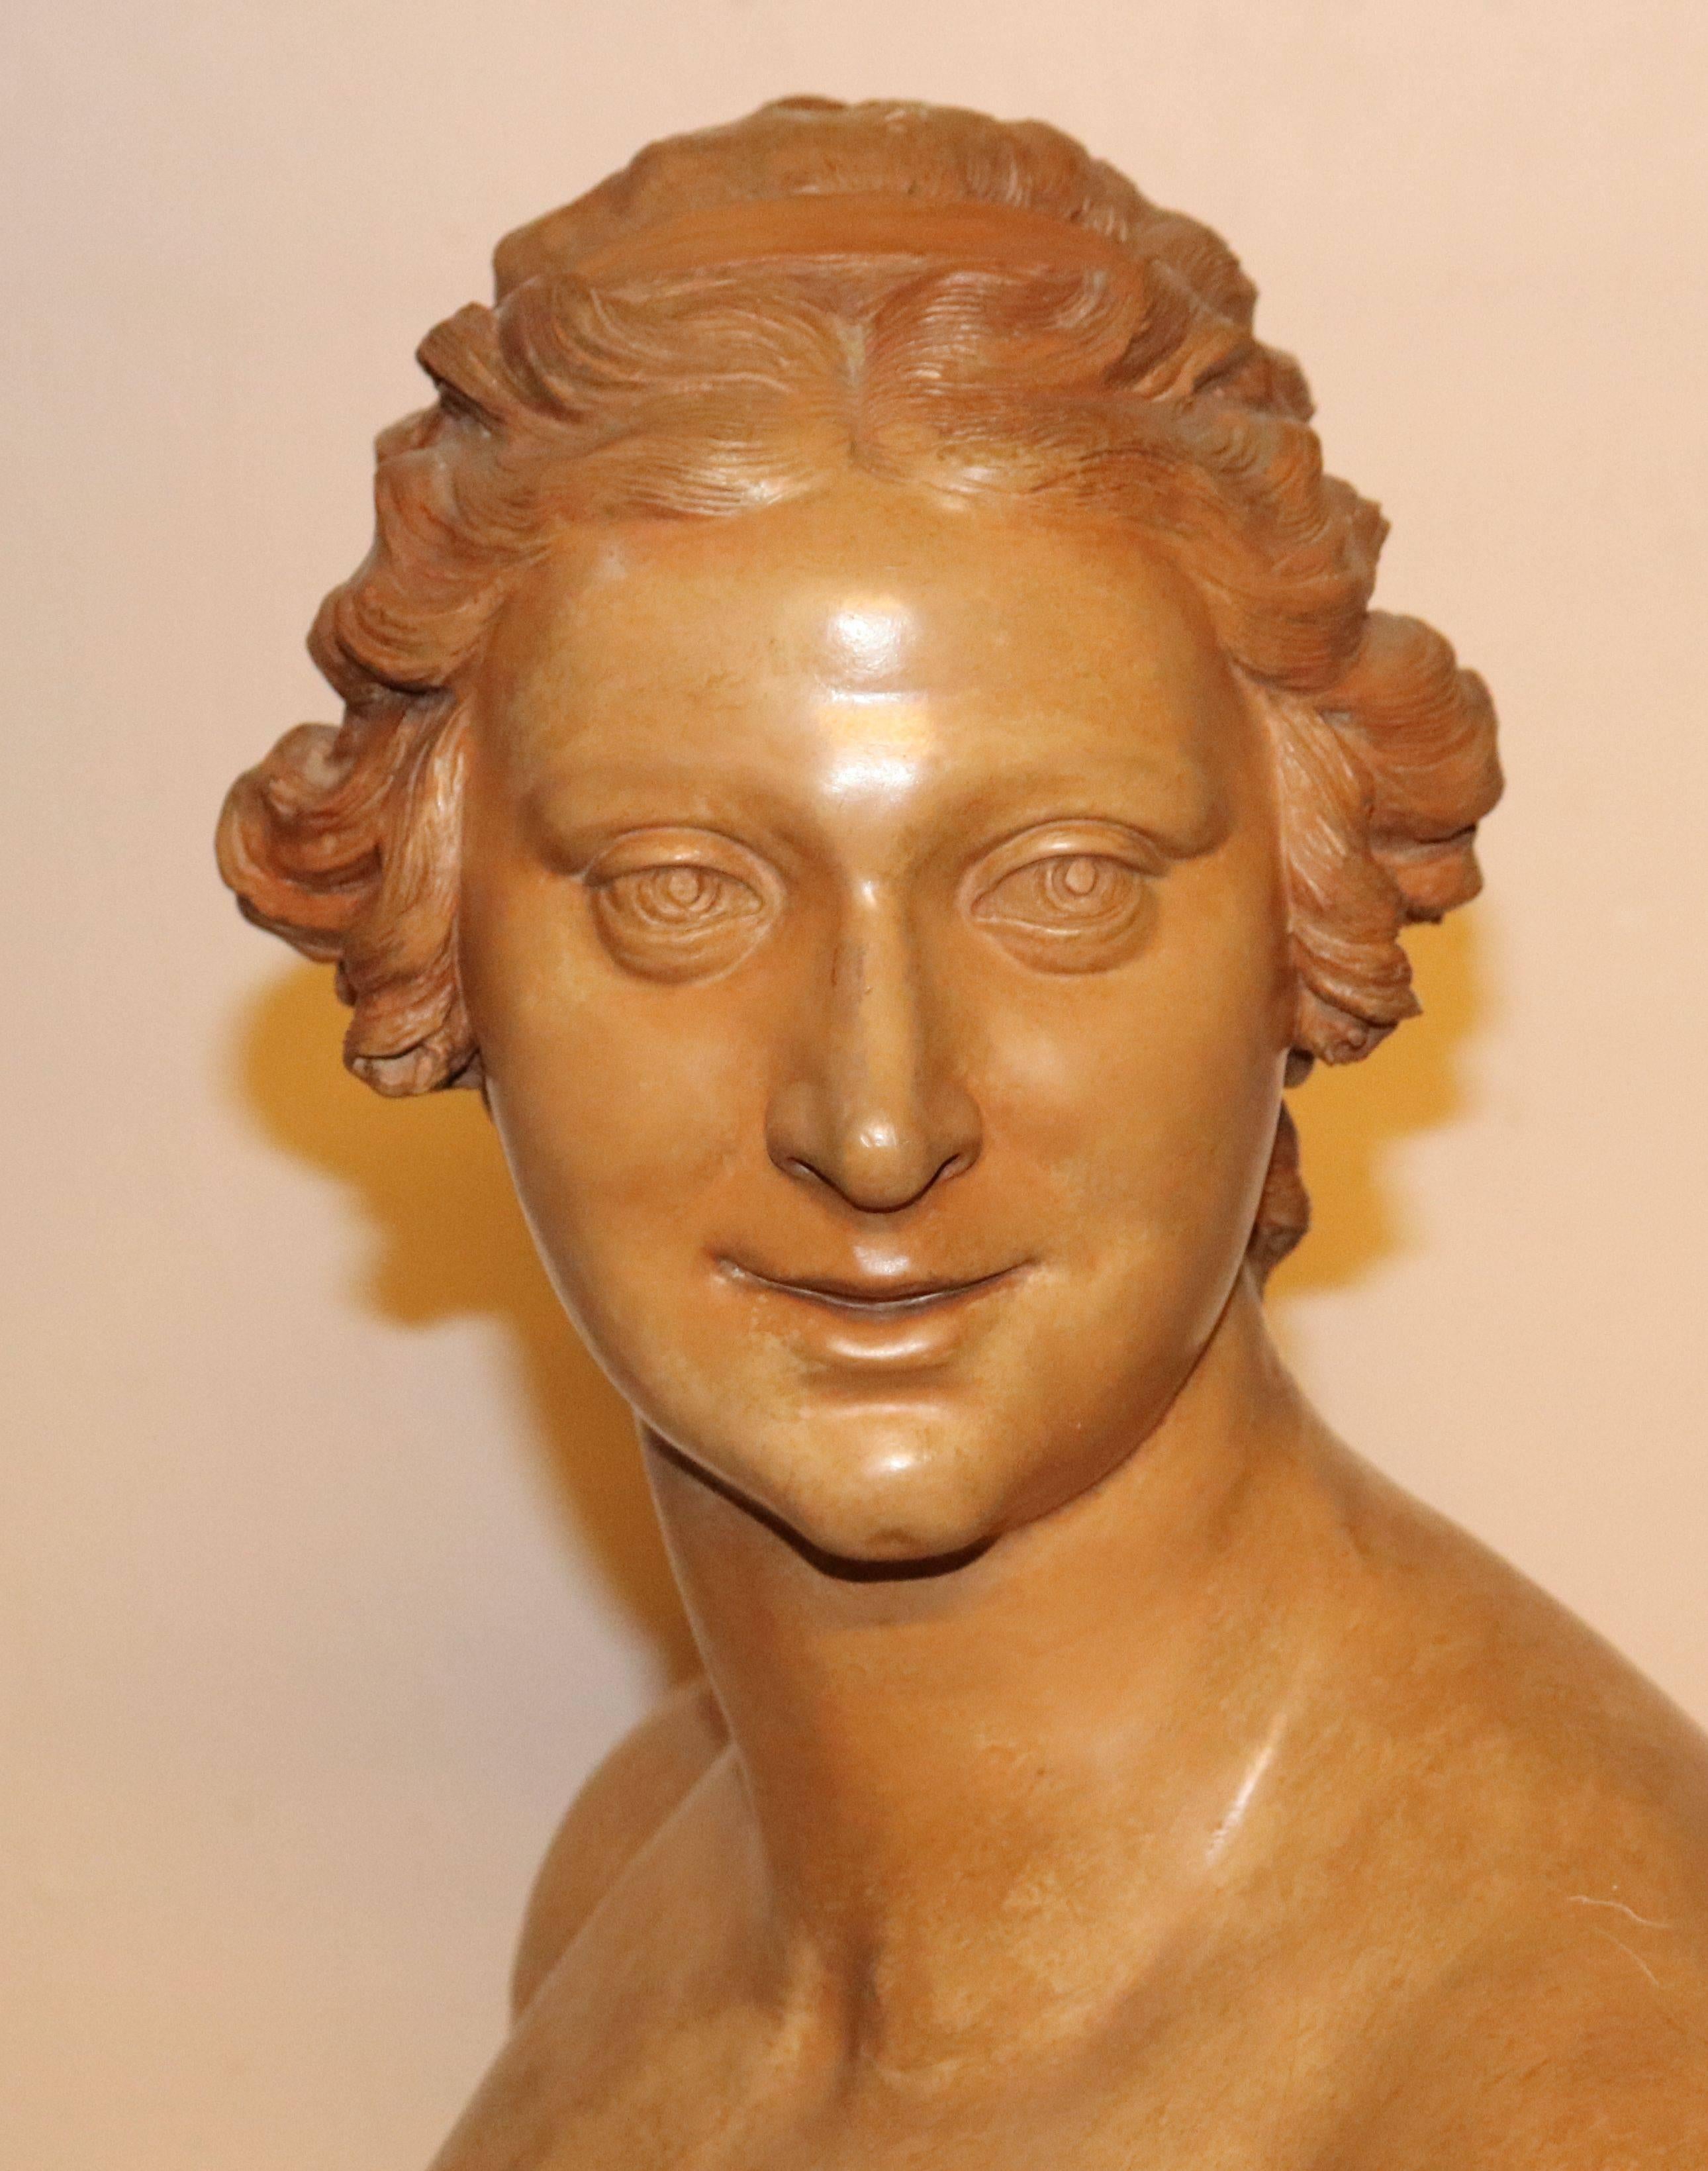 Middle of 18th century, French terracotta bust
on a marble base with a slight damage to the base.